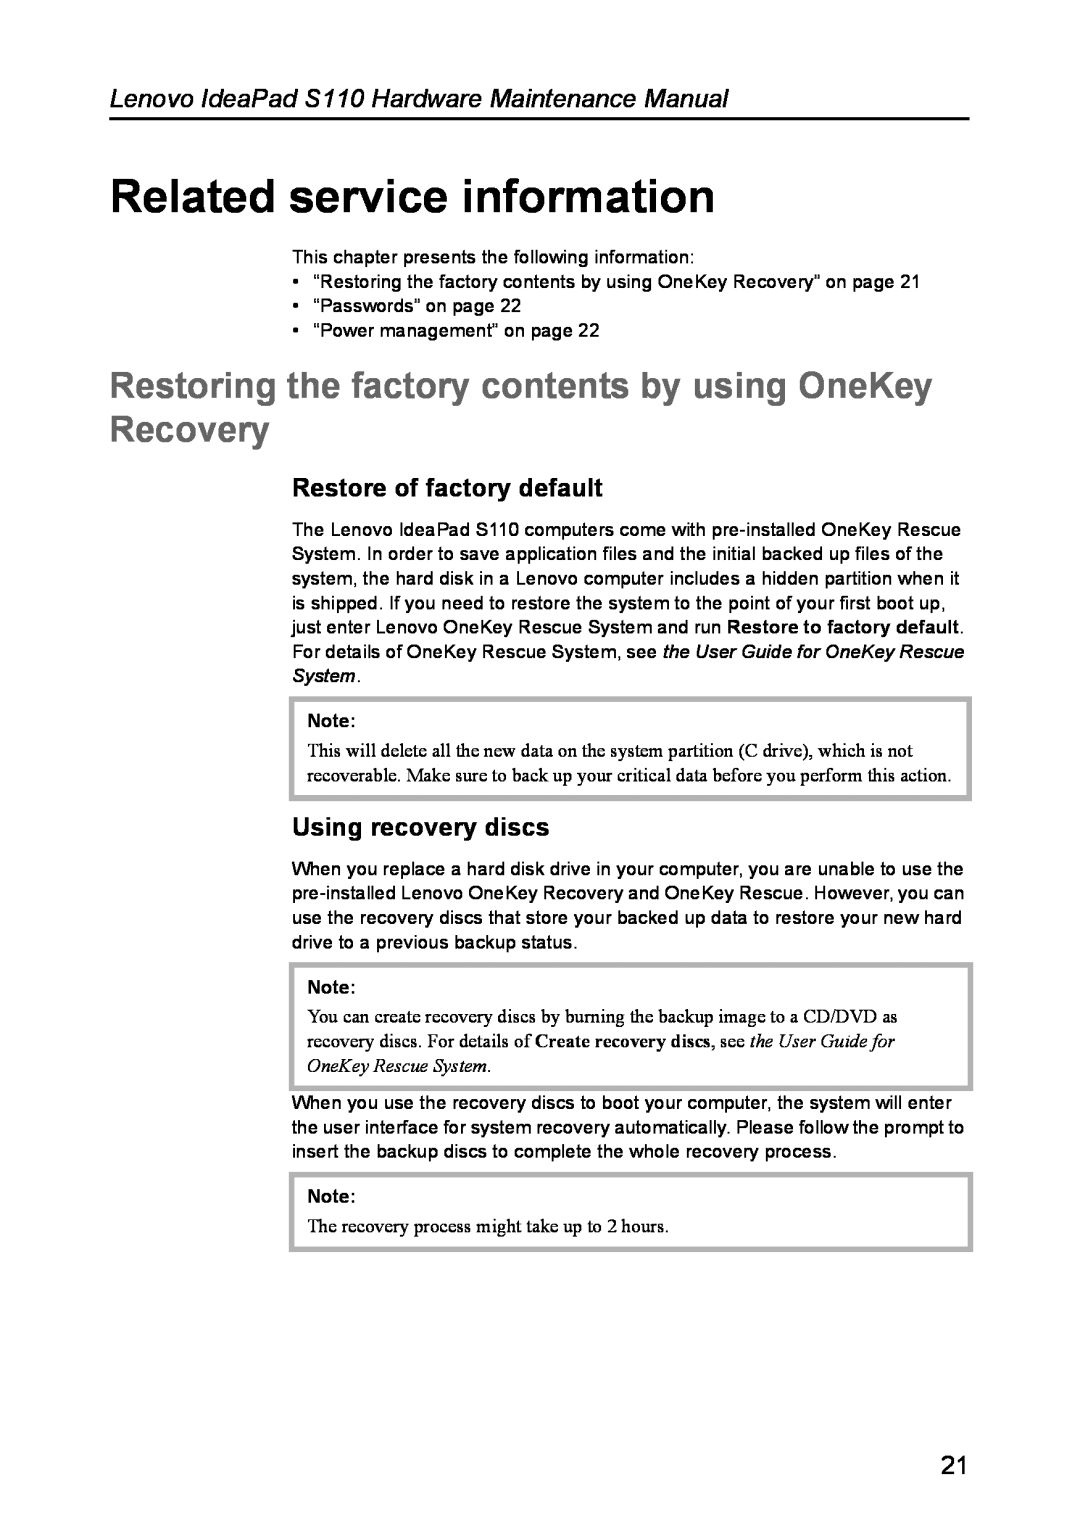 Lenovo S110 Related service information, Restoring the factory contents by using OneKey Recovery, Using recovery discs 